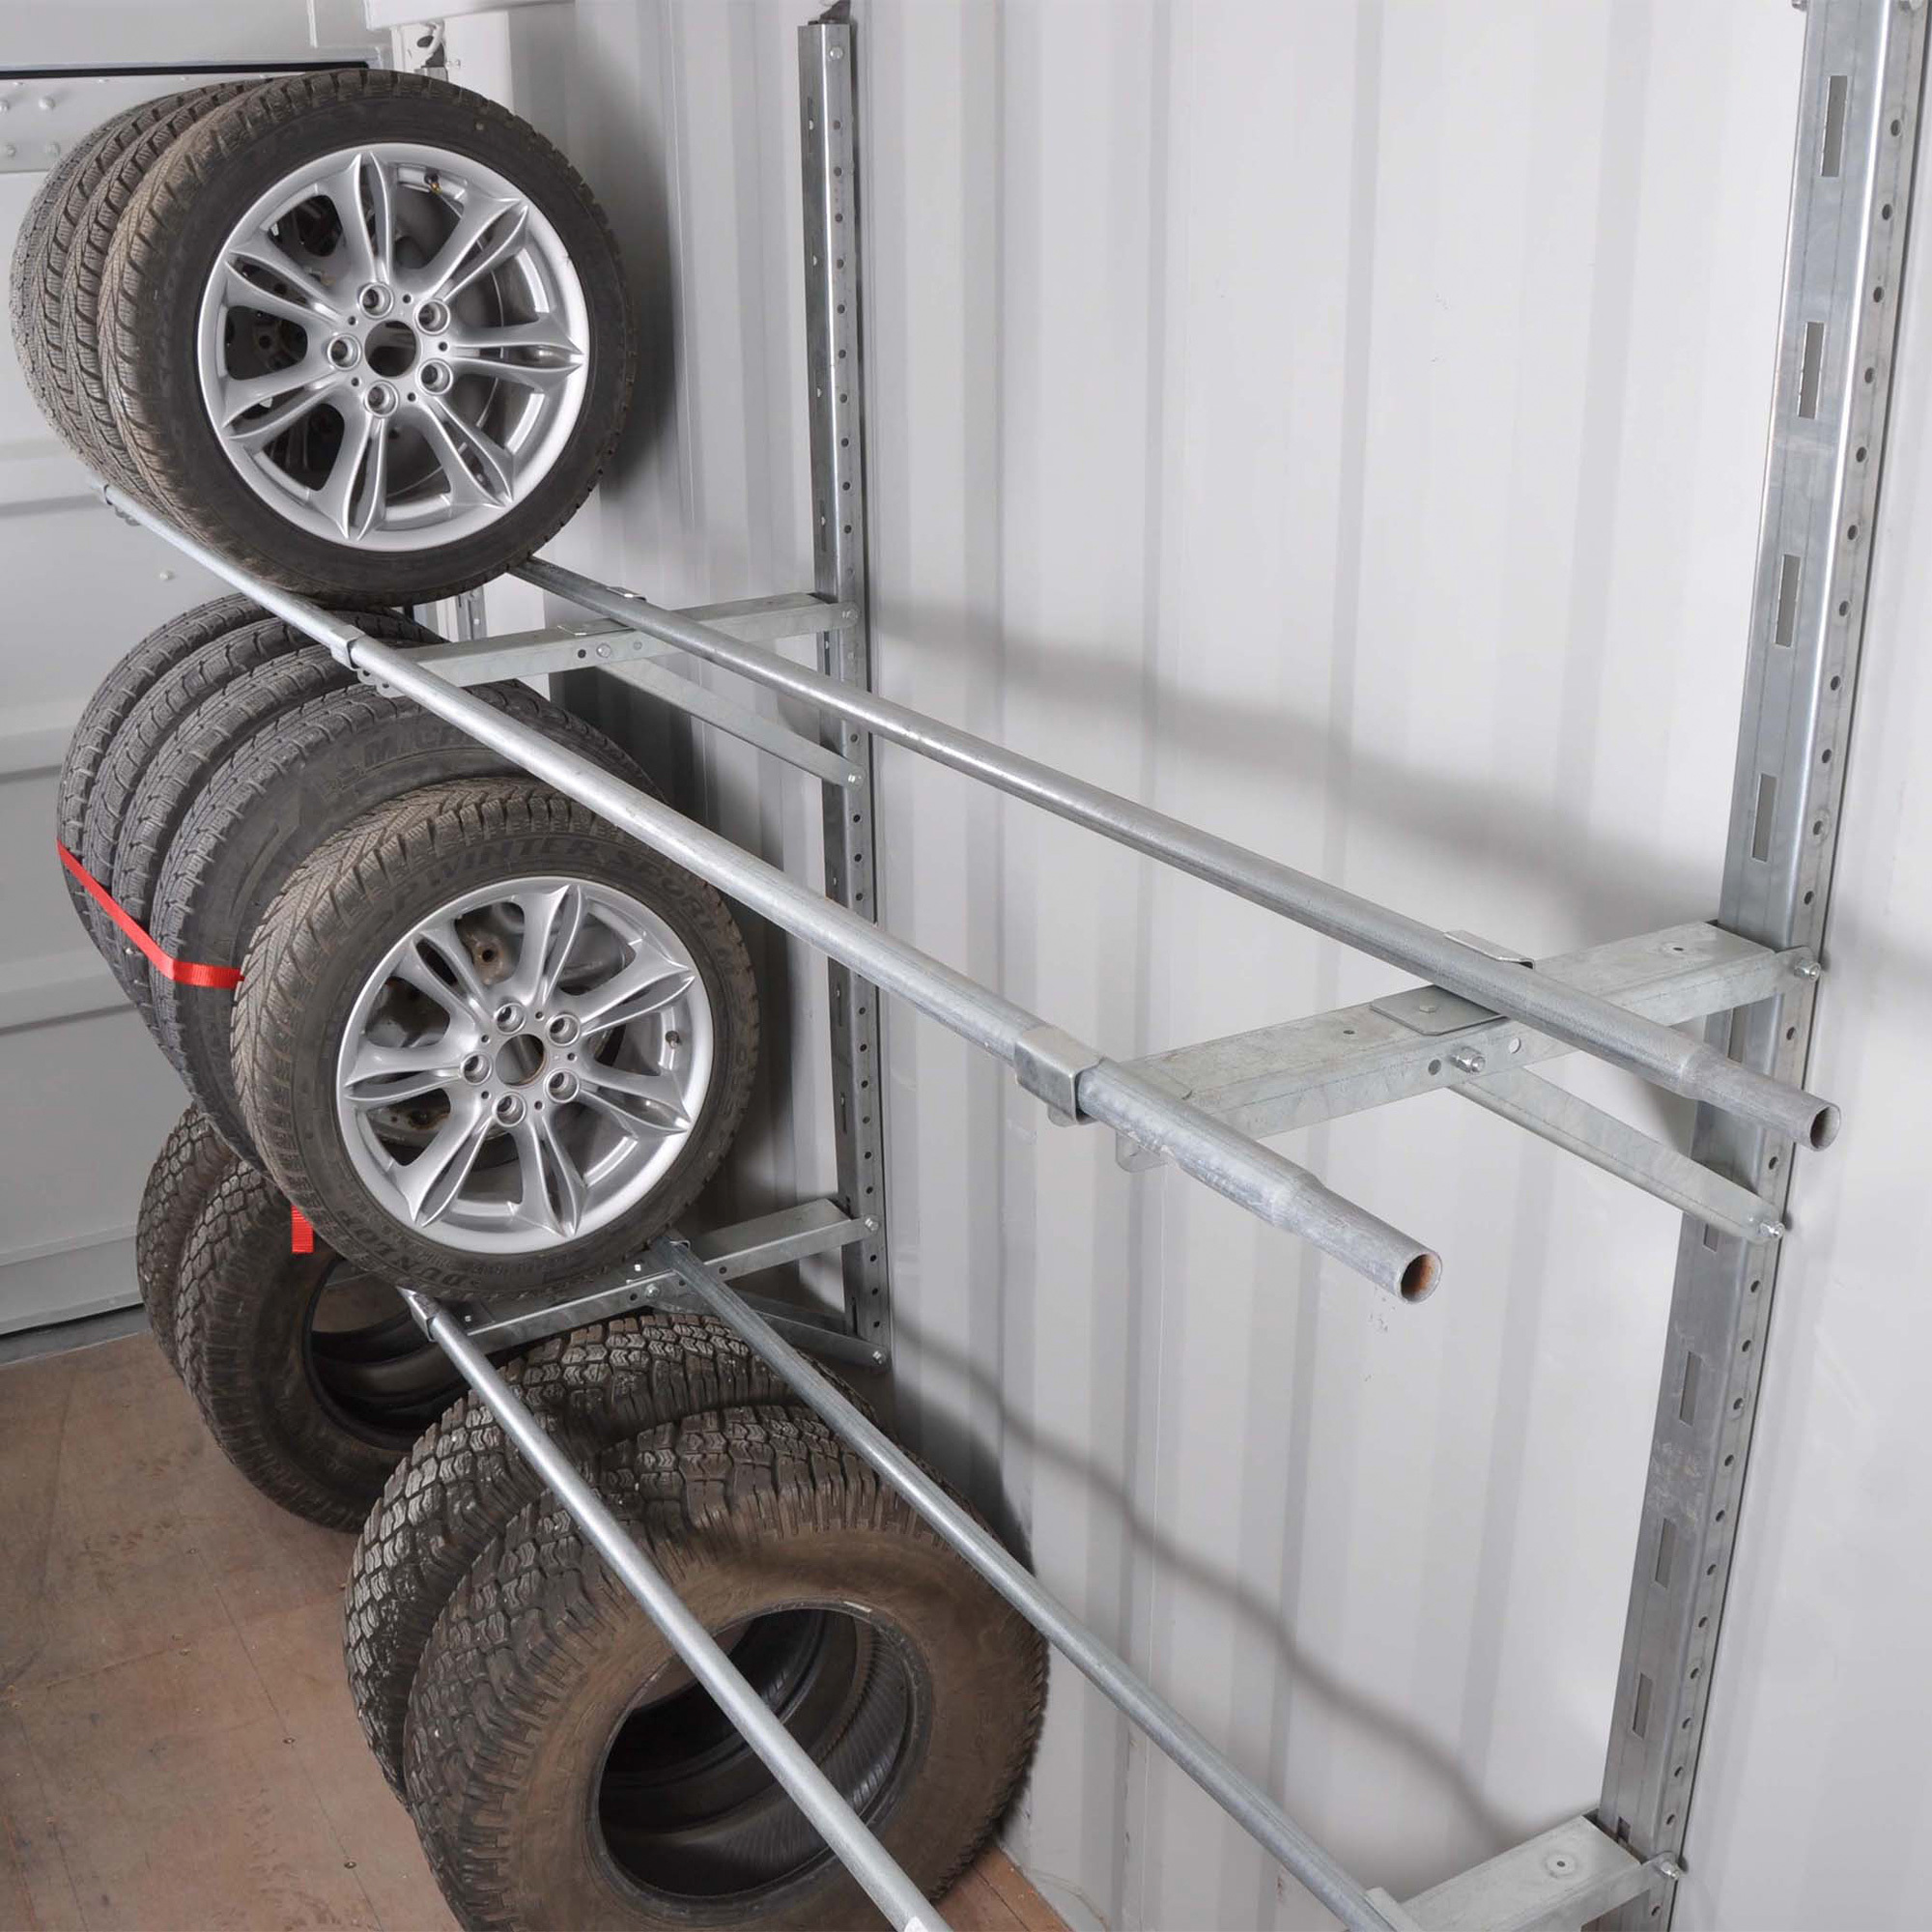 Western Steel & Tube Container Tire Storage Kit â 2 Level, Model 1412